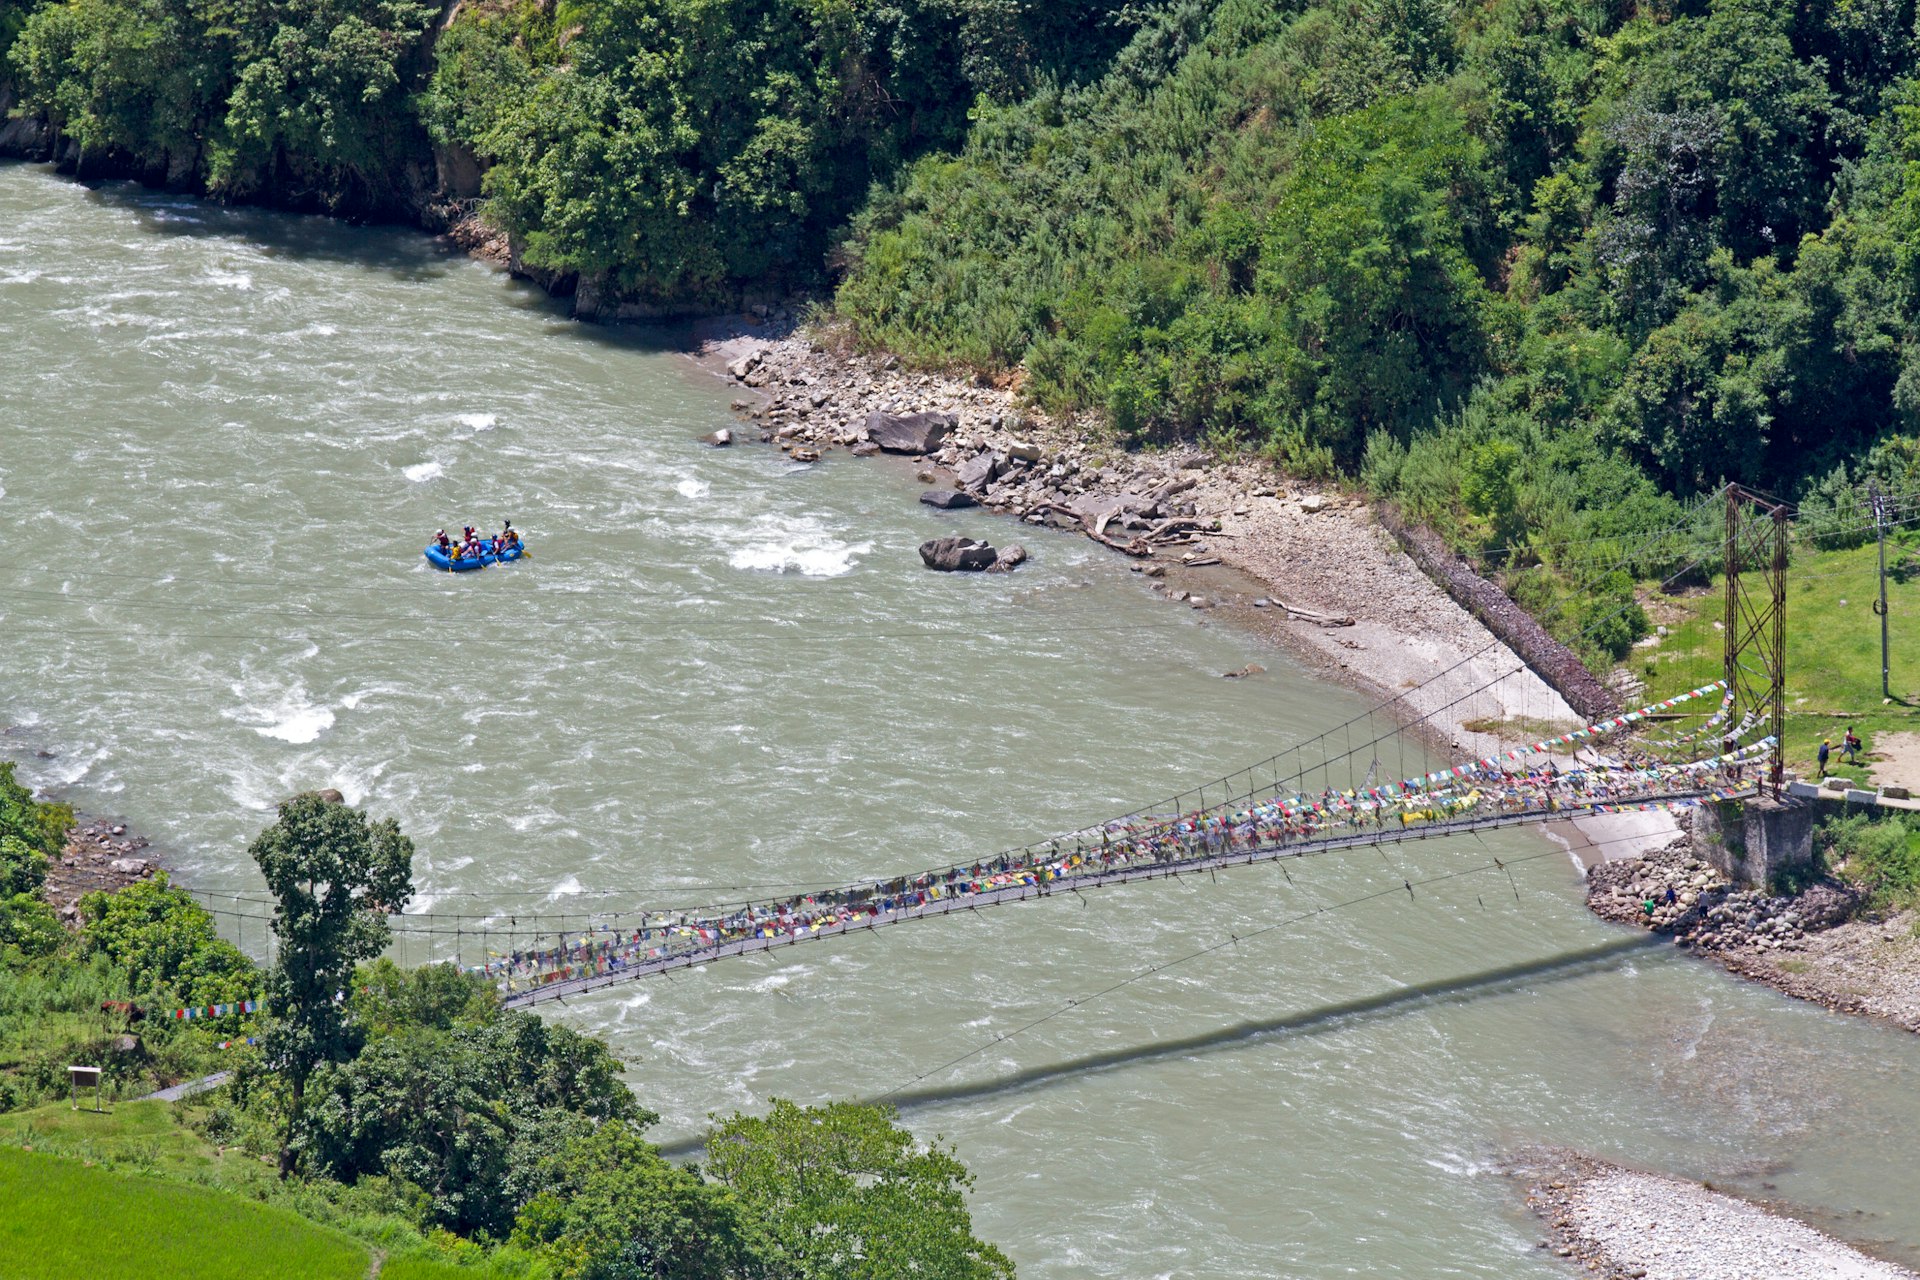 A blue river raft makes its way down a greenish-grey river that is lined with gravel banks and forests; they have just past beneath a prayer flag-covered footbridge that spans the river.